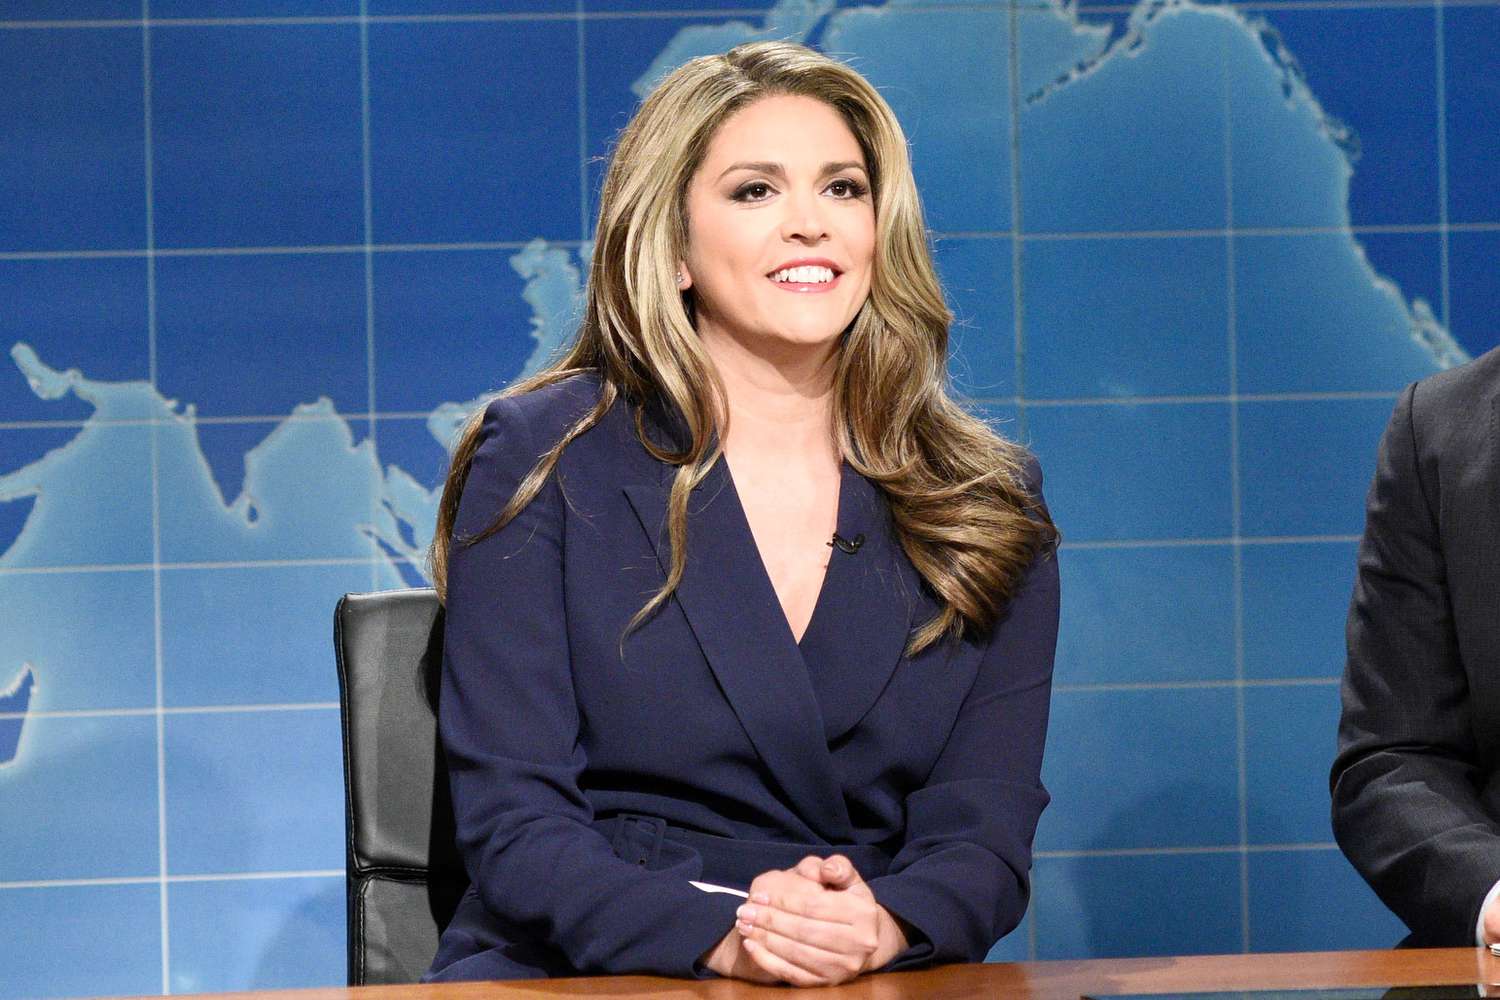 No, Cecily Strong did not quietly leave Saturday Night Live.